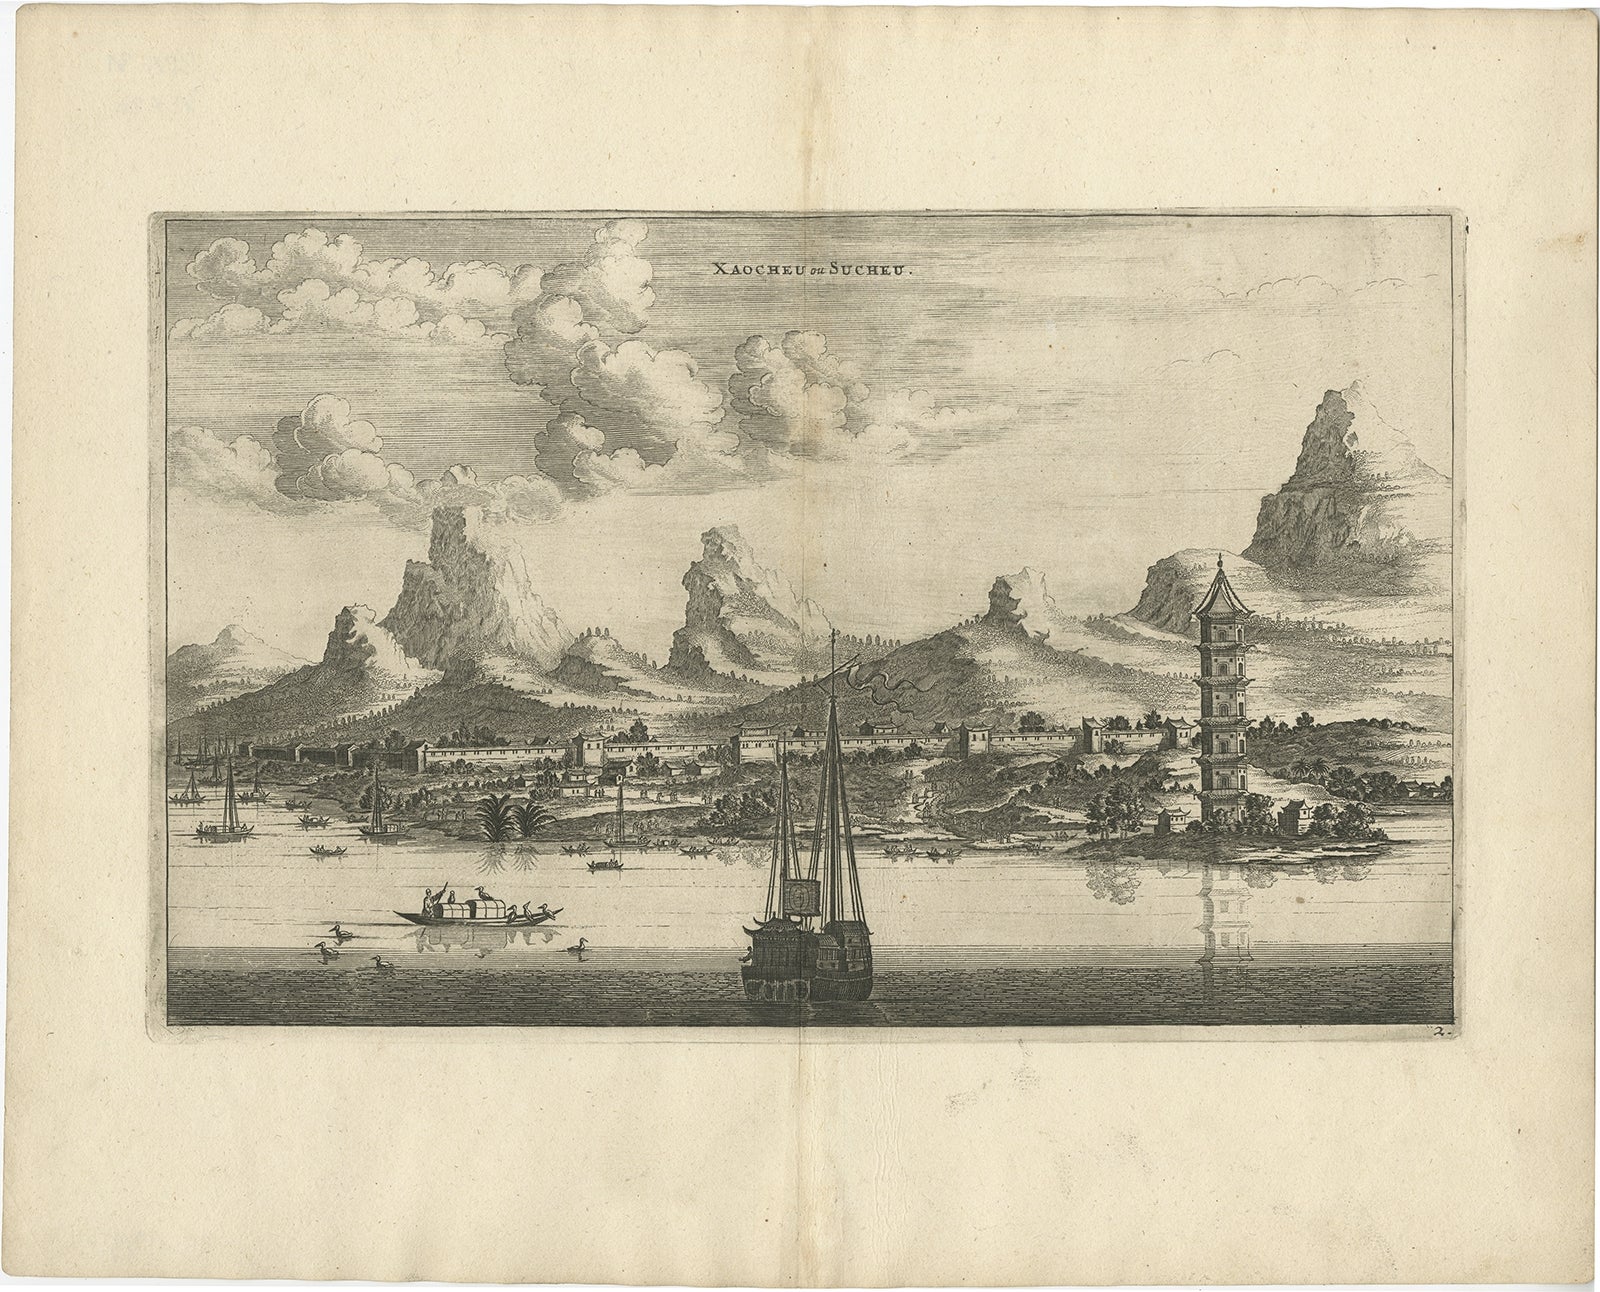 Antique Print of the City of Sucheu in China, 1668